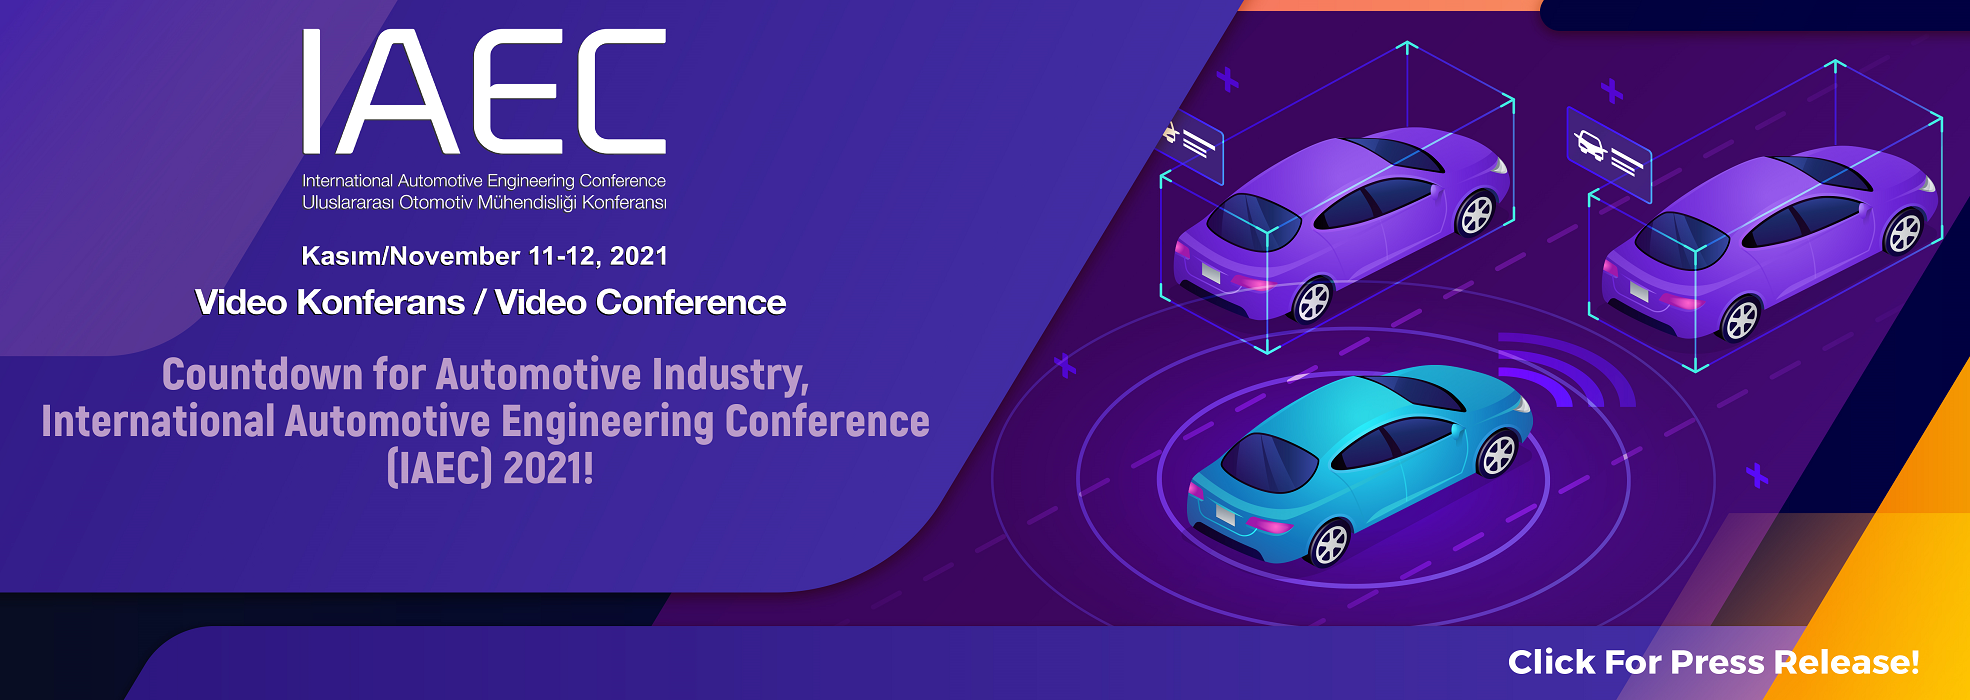 Countdown for Automotive Industry, International Automotive Engineering Conference (IAEC) 2021!